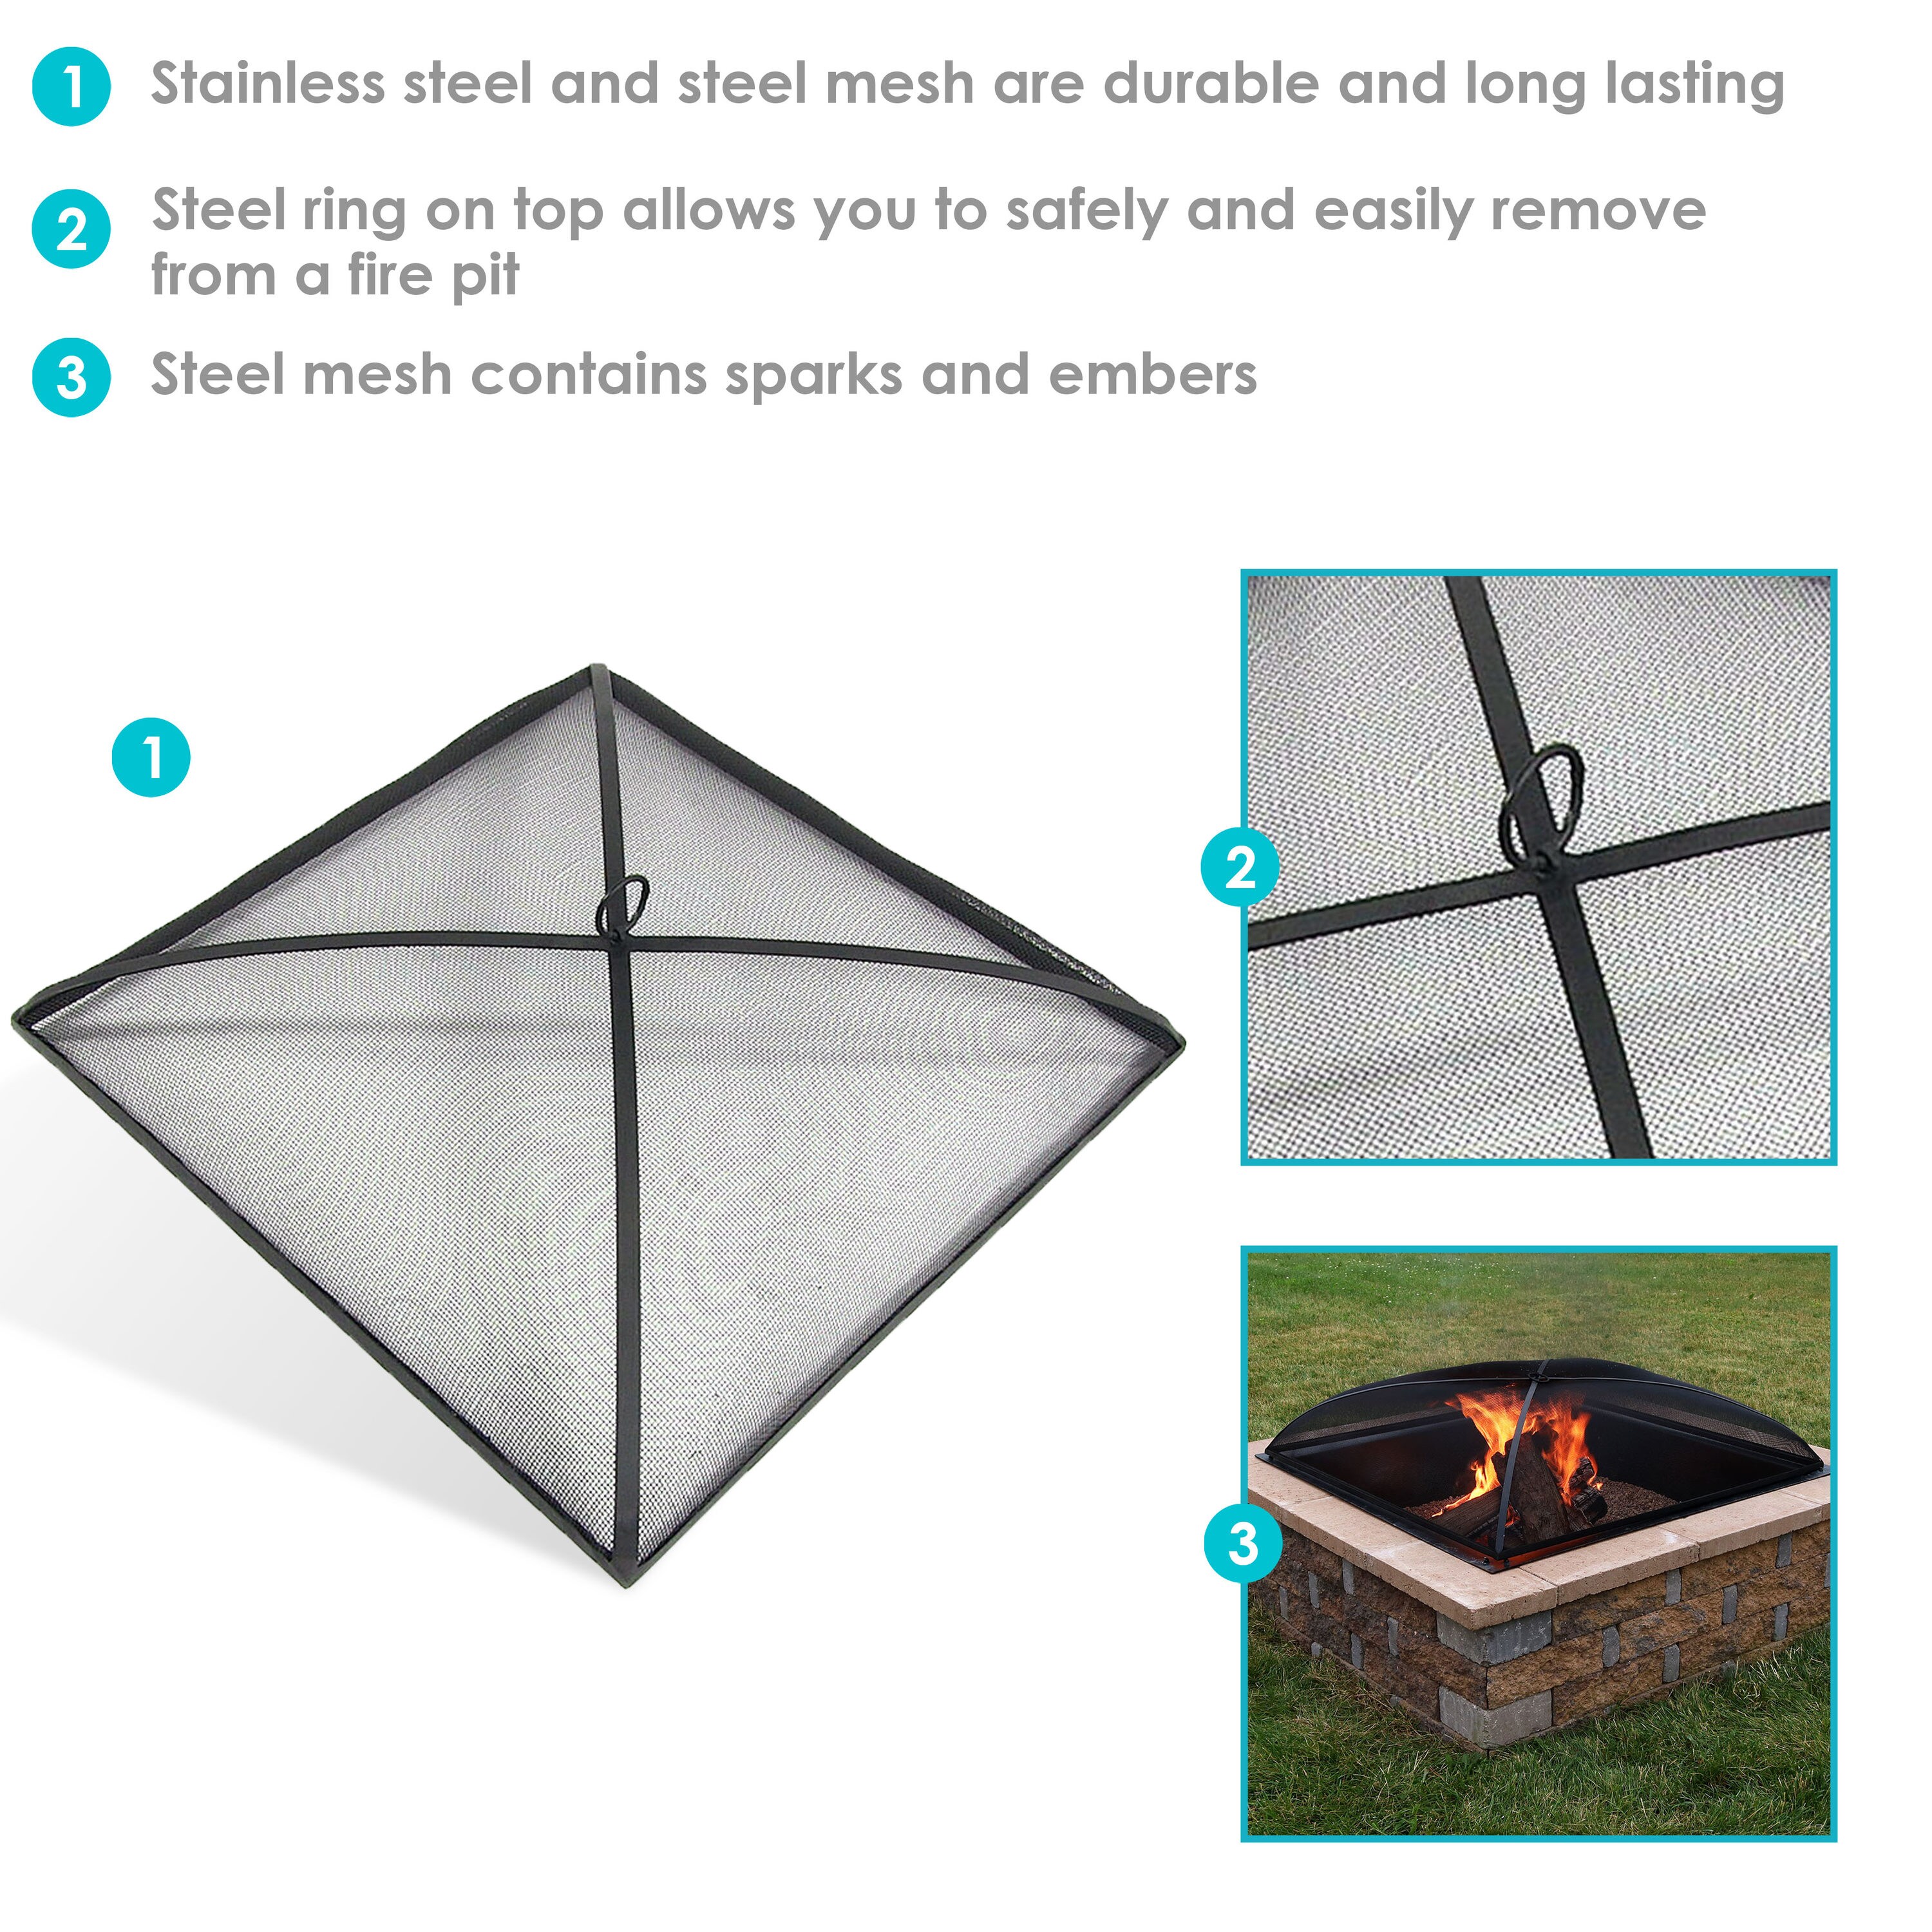 Outdoor Heavy Duty Steel Square Firepit Lid Protector 31 Inch Black Metal Mesh Fire Pit Replacement Accessory Sunnydaze Fire Pit Spark Screen Cover